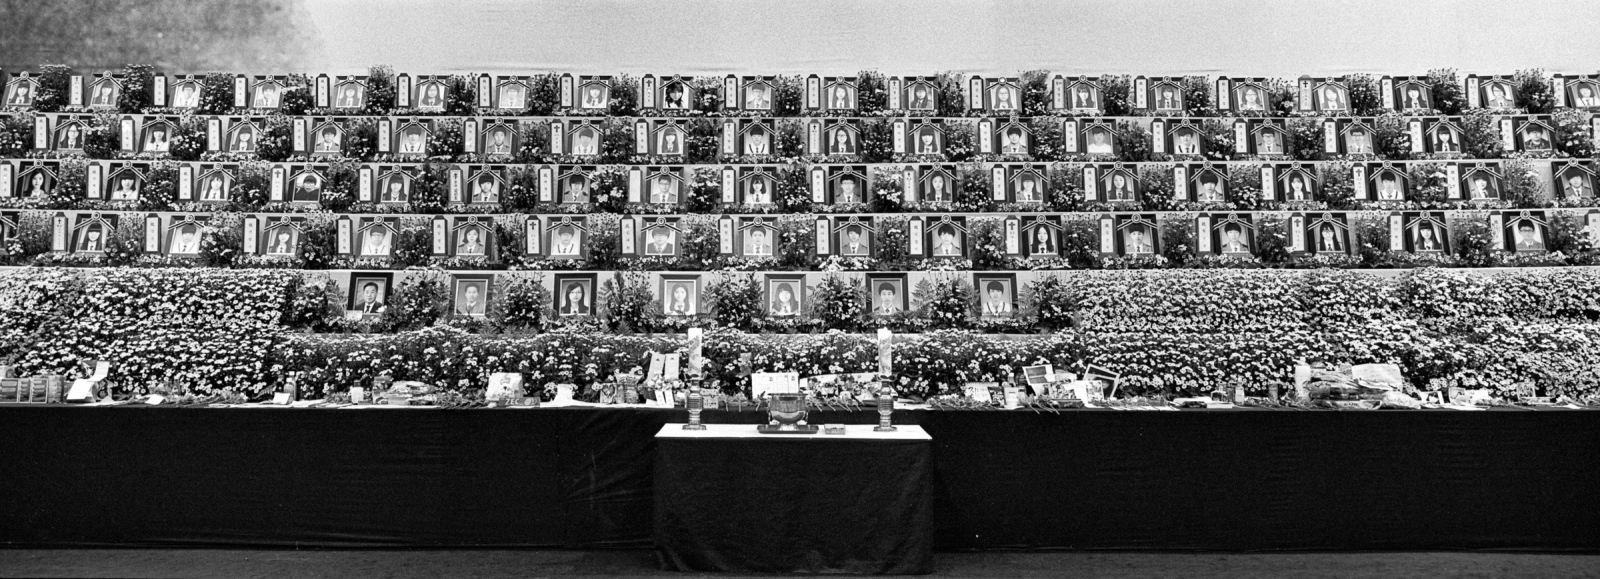  Portraits of the victims of Sewol Ferry disaster are seen at mutual funeral stance at Ansan gymnasium on July 20, 2014 in Ansan, South Korea. 